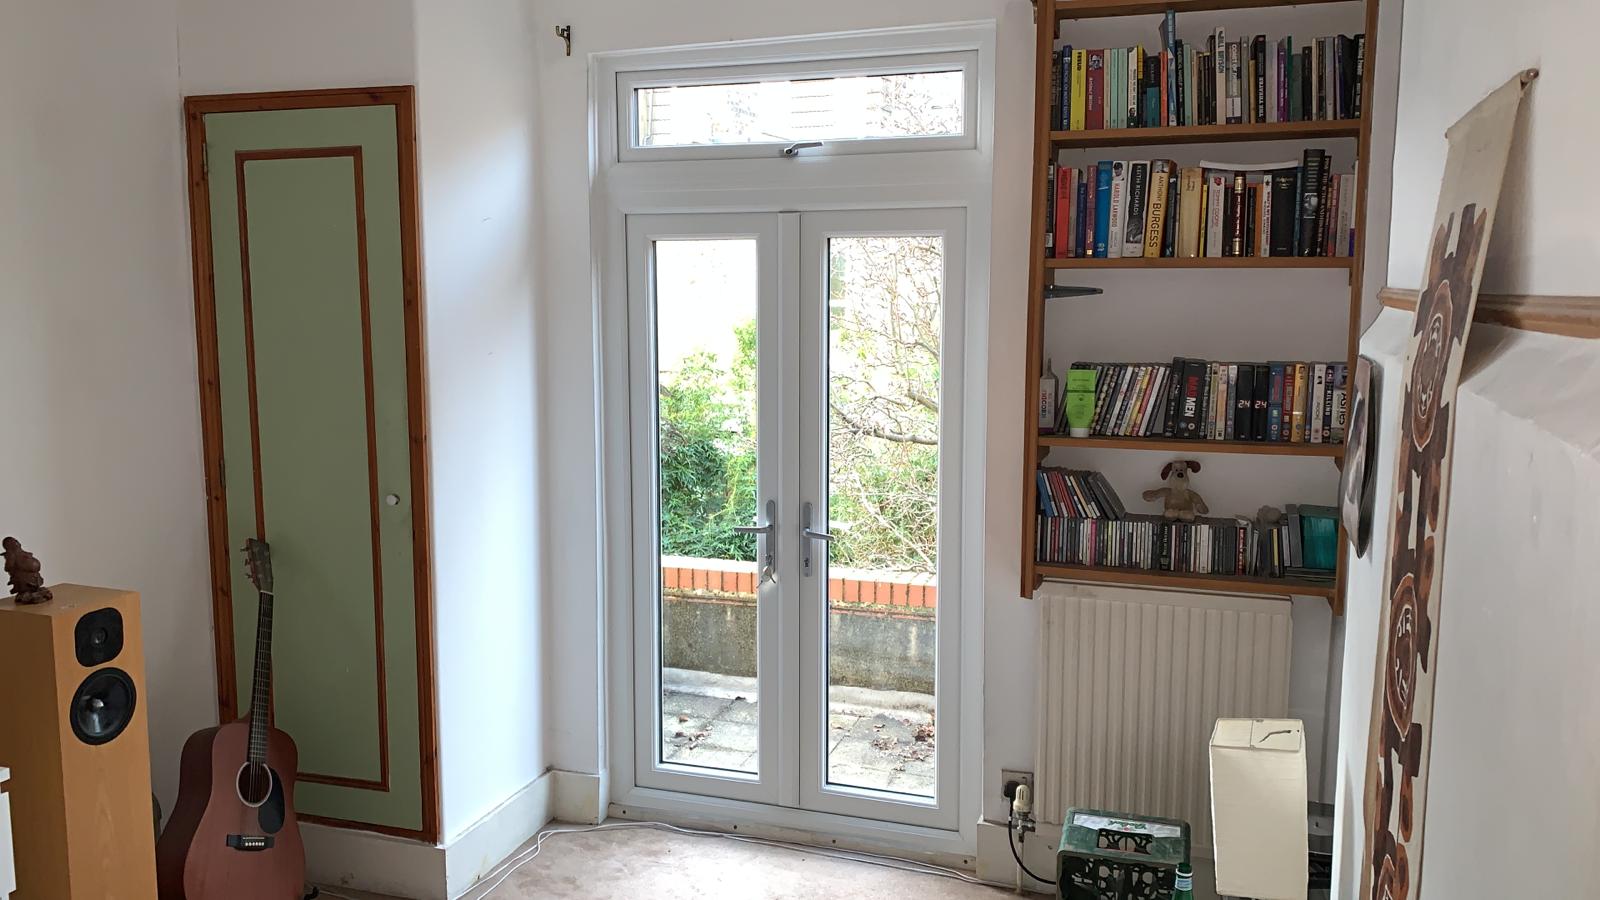 Gallery Photo French Doors